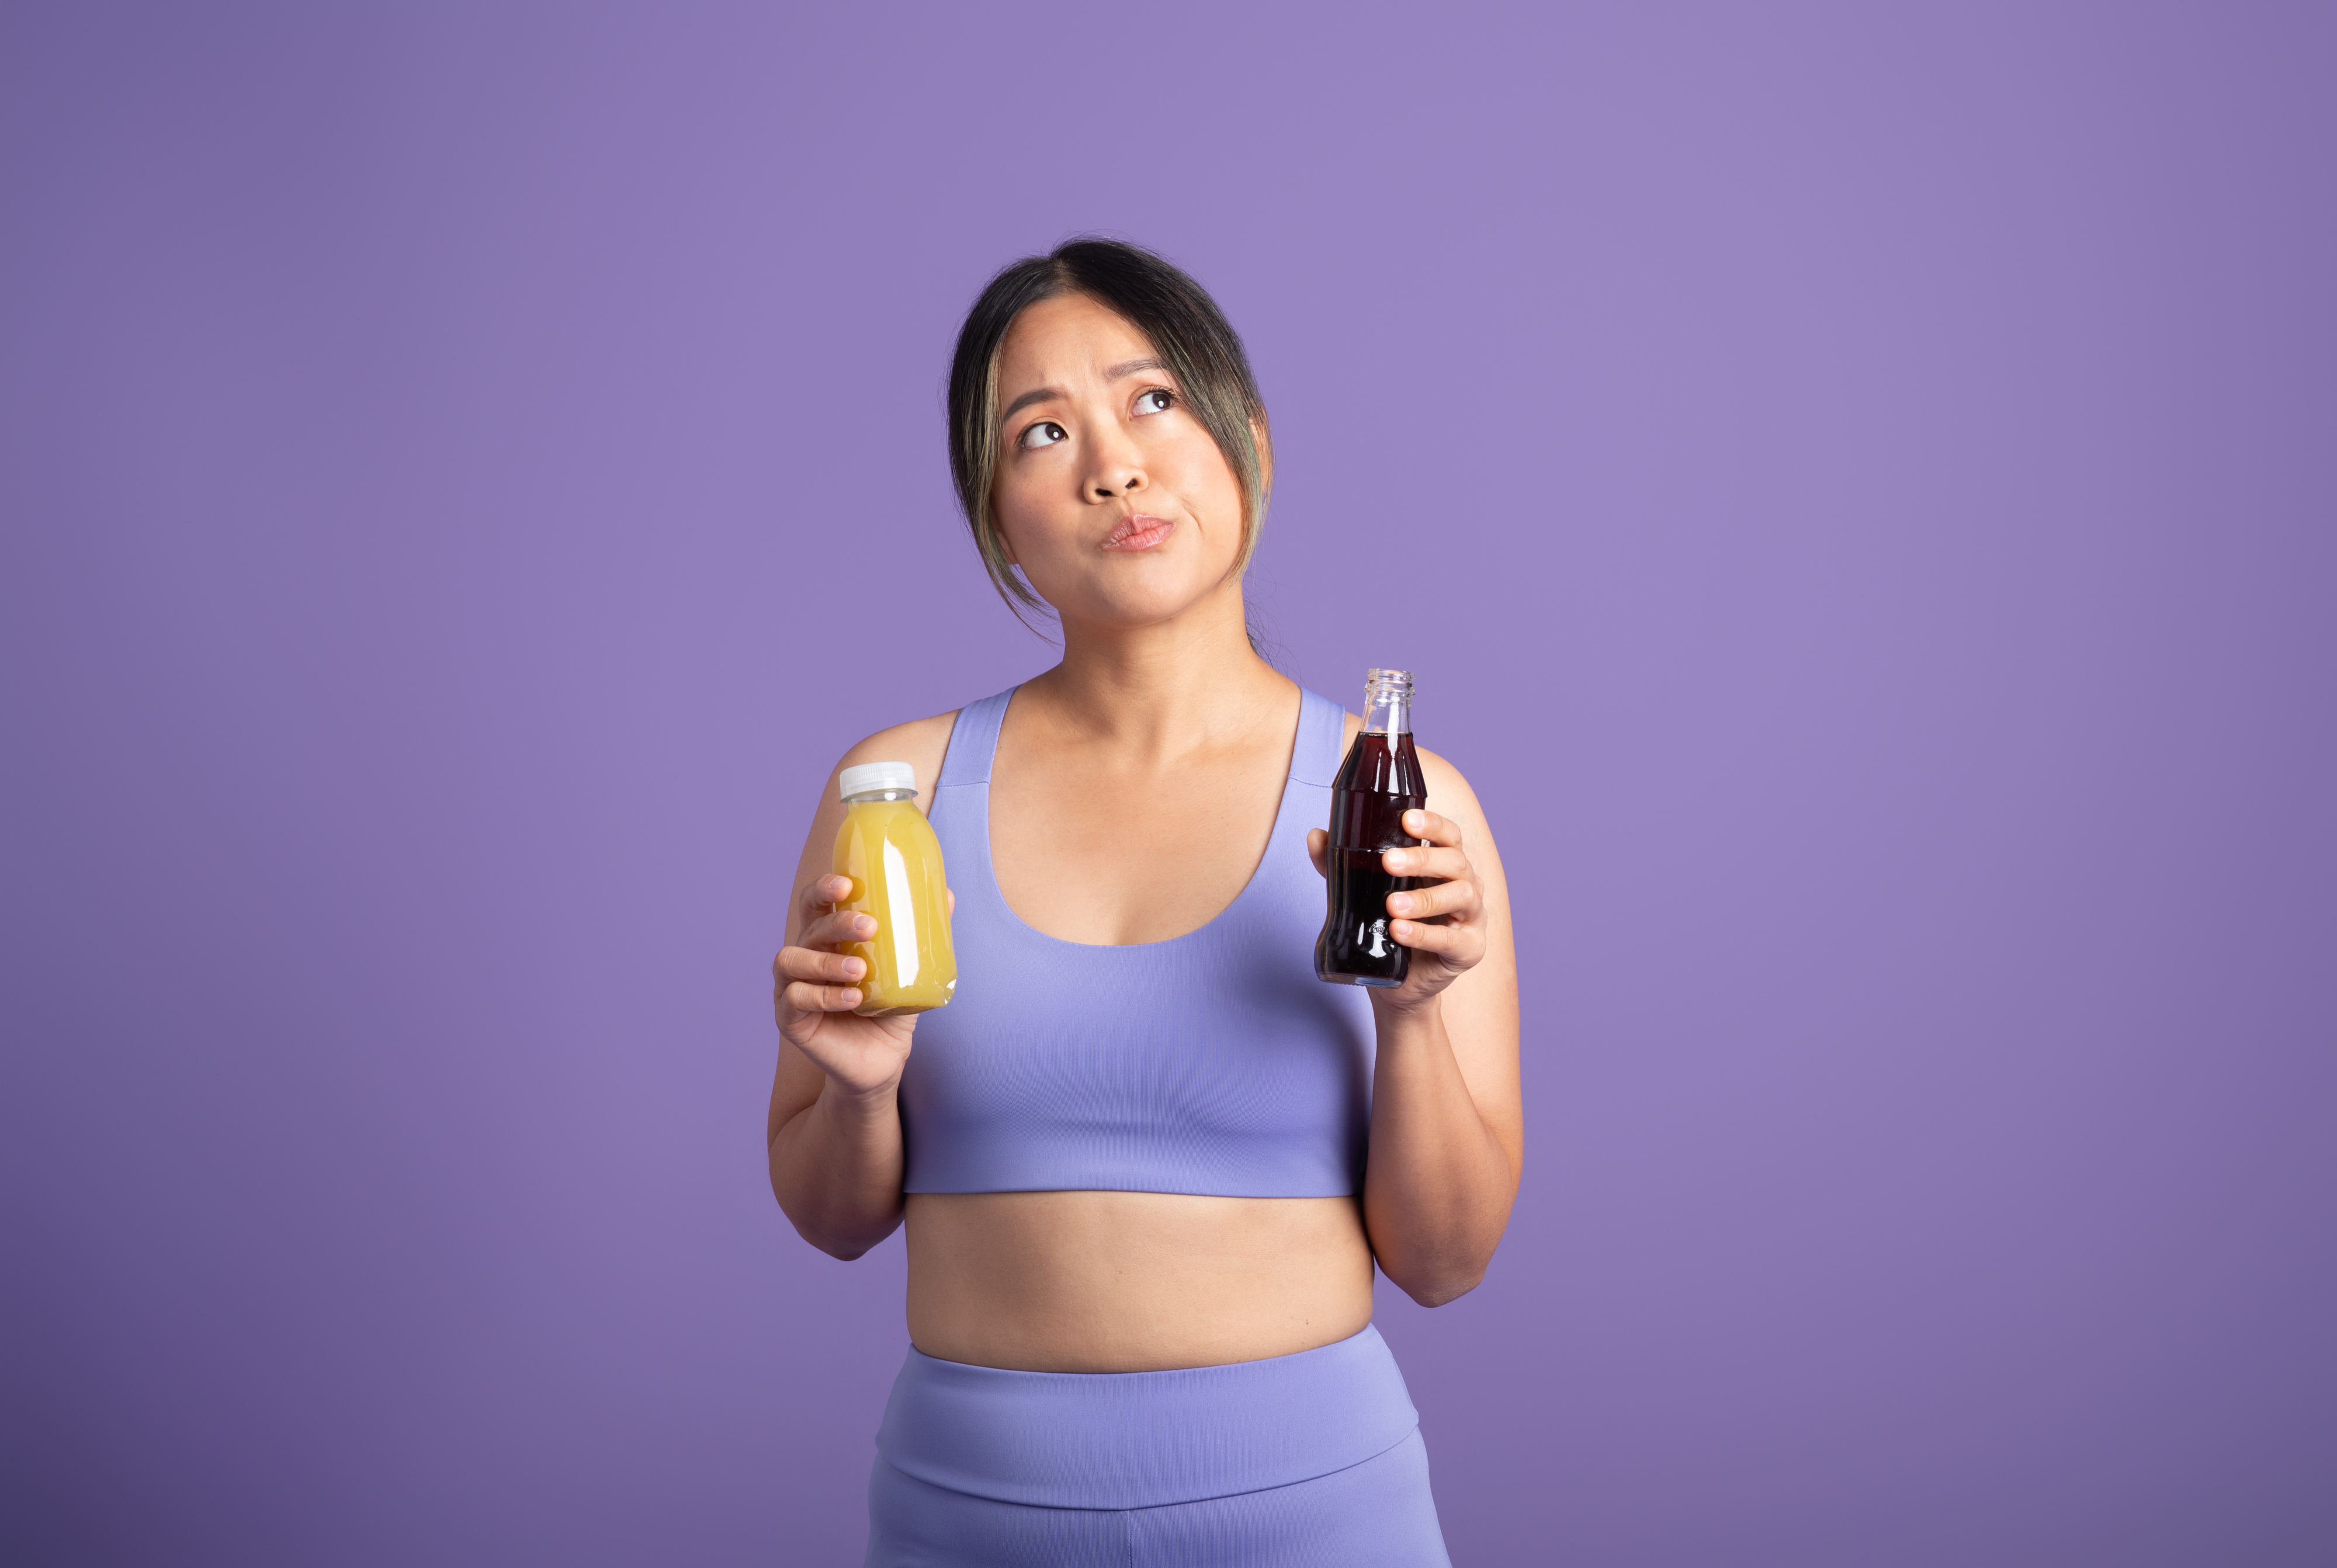 Woman in sportswear holding a juice bottle and a soda, looking contemplative